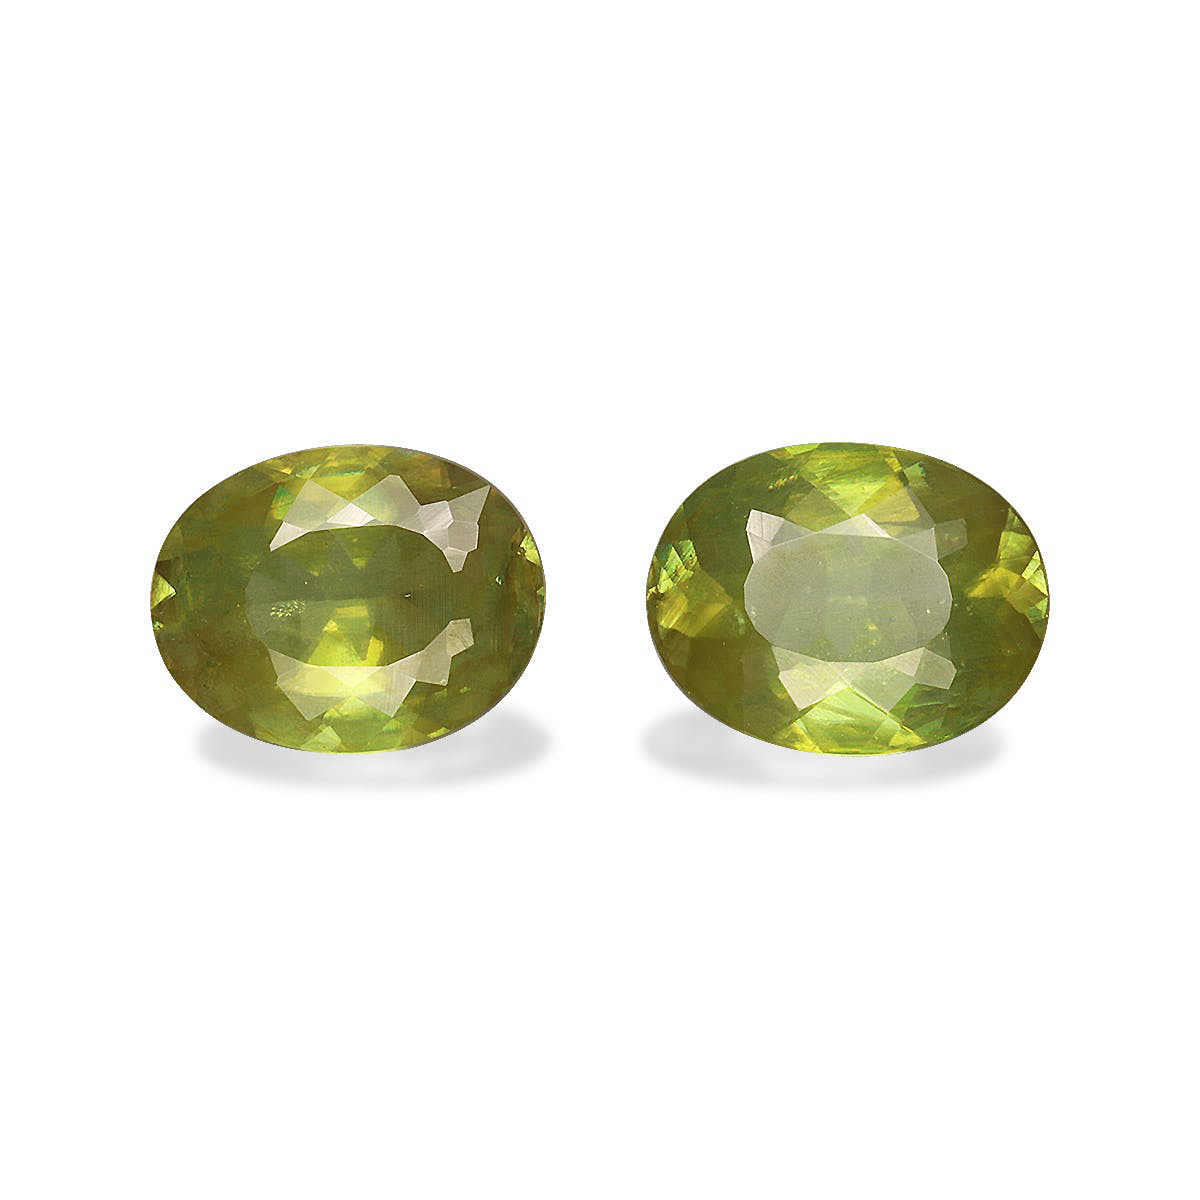 Picture of Lime Green Sphene 3.27ct - 9x7mm Pair (SH0701)